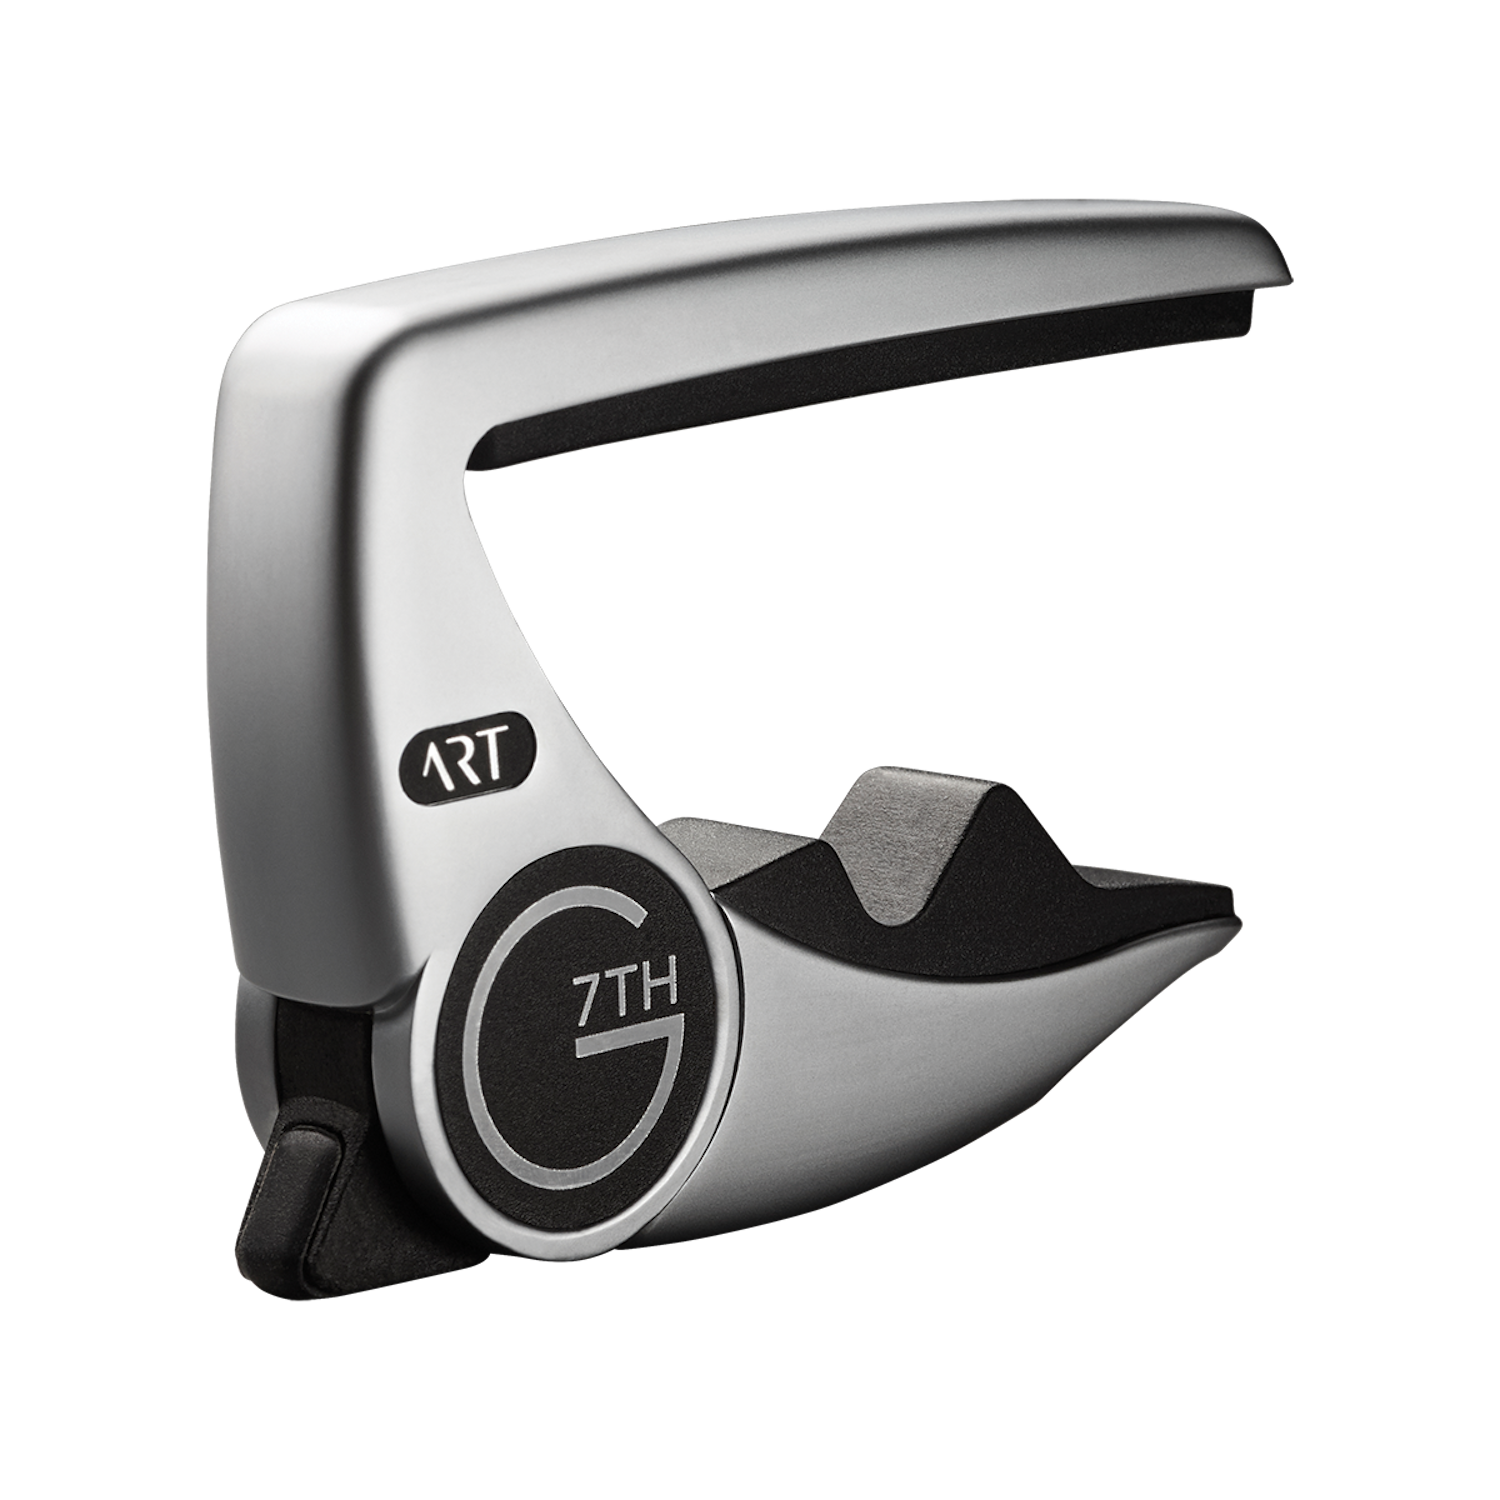 G7th Performance 3 Capo Steel String Silver